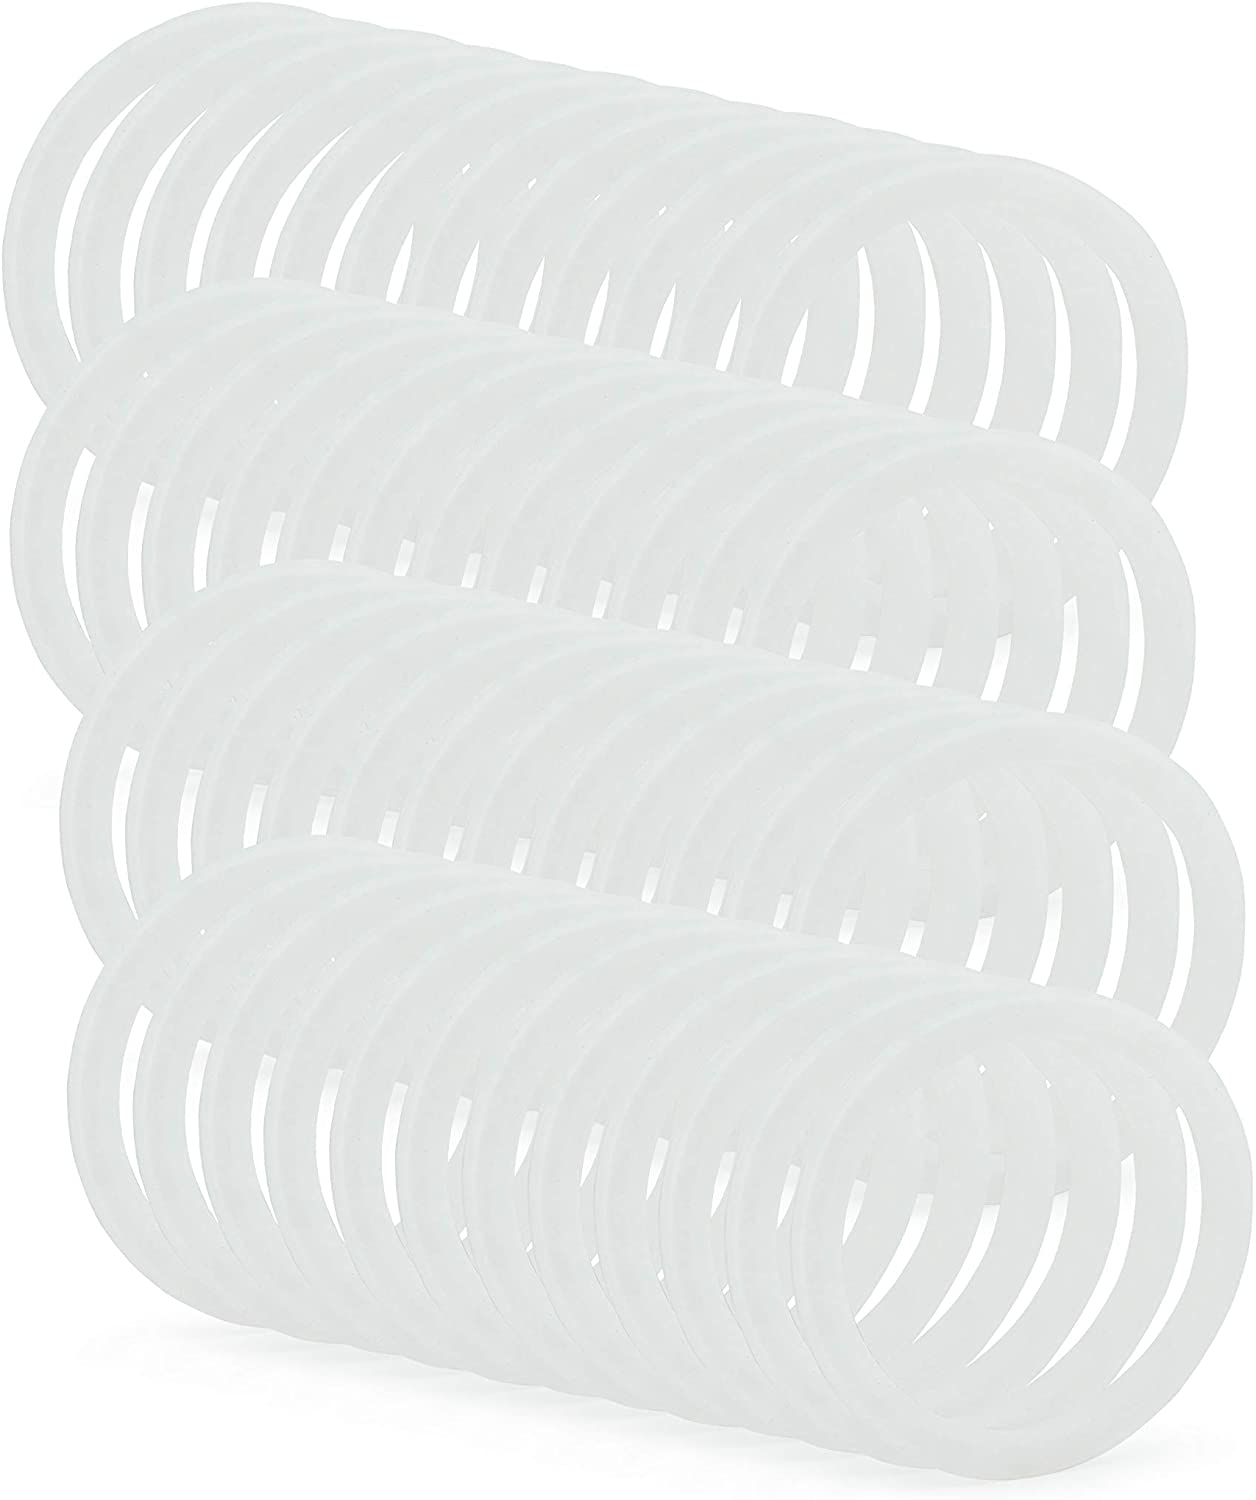 Silicone Seal Rings for Plastic Mason Jar Lids (Regular Mouth, Case of 1296) - SH_1464_CASE